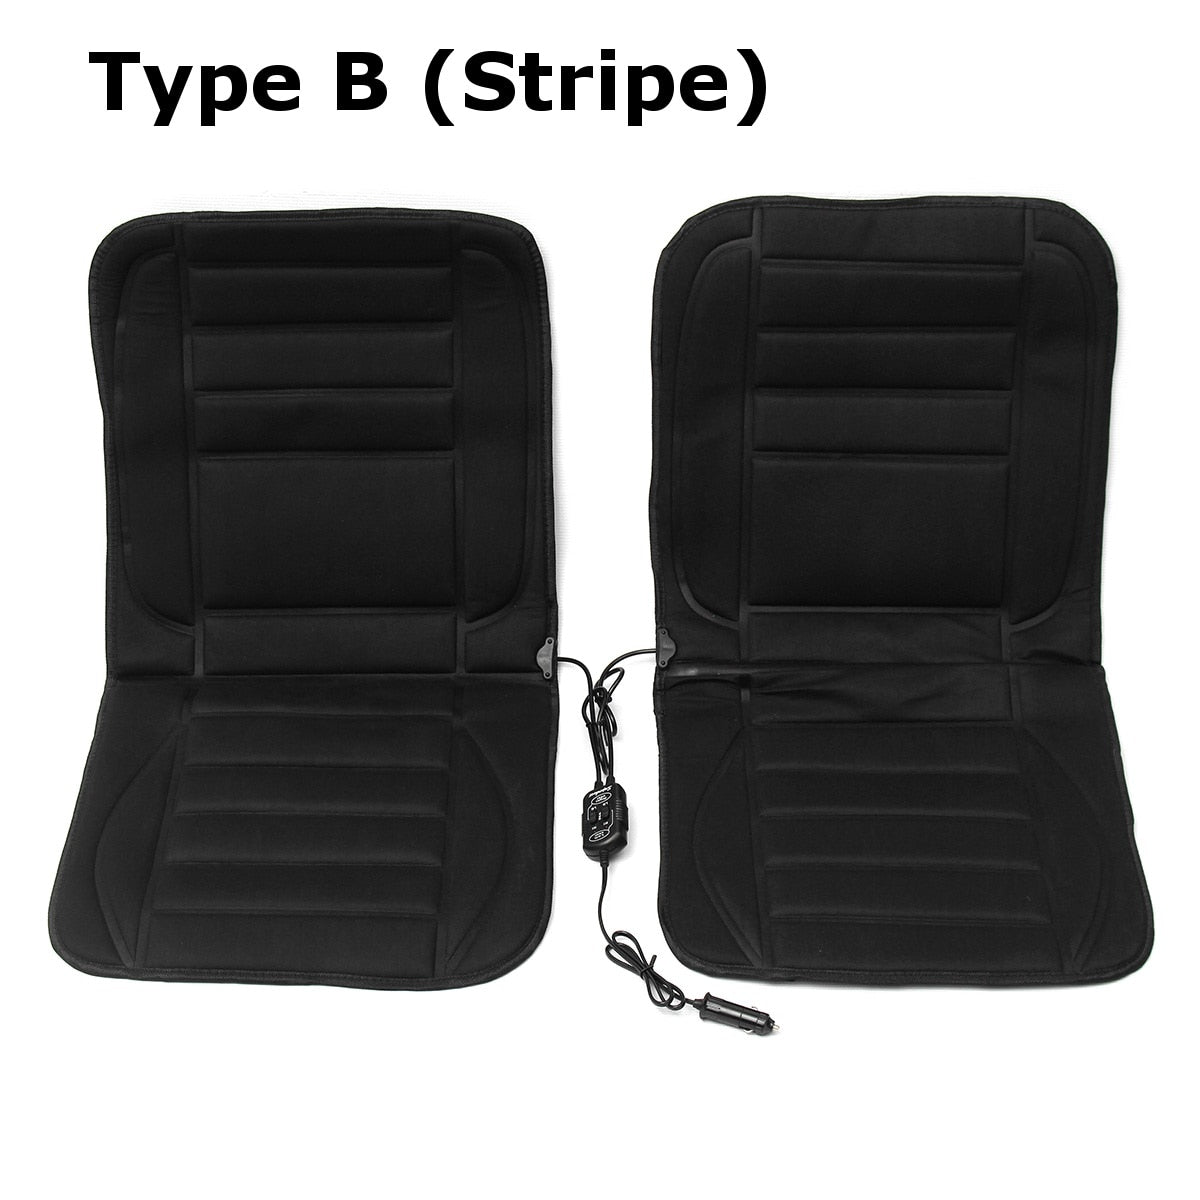 2PCS 12V Universal Fast Thicken Heated Car Seat Cushion Cover